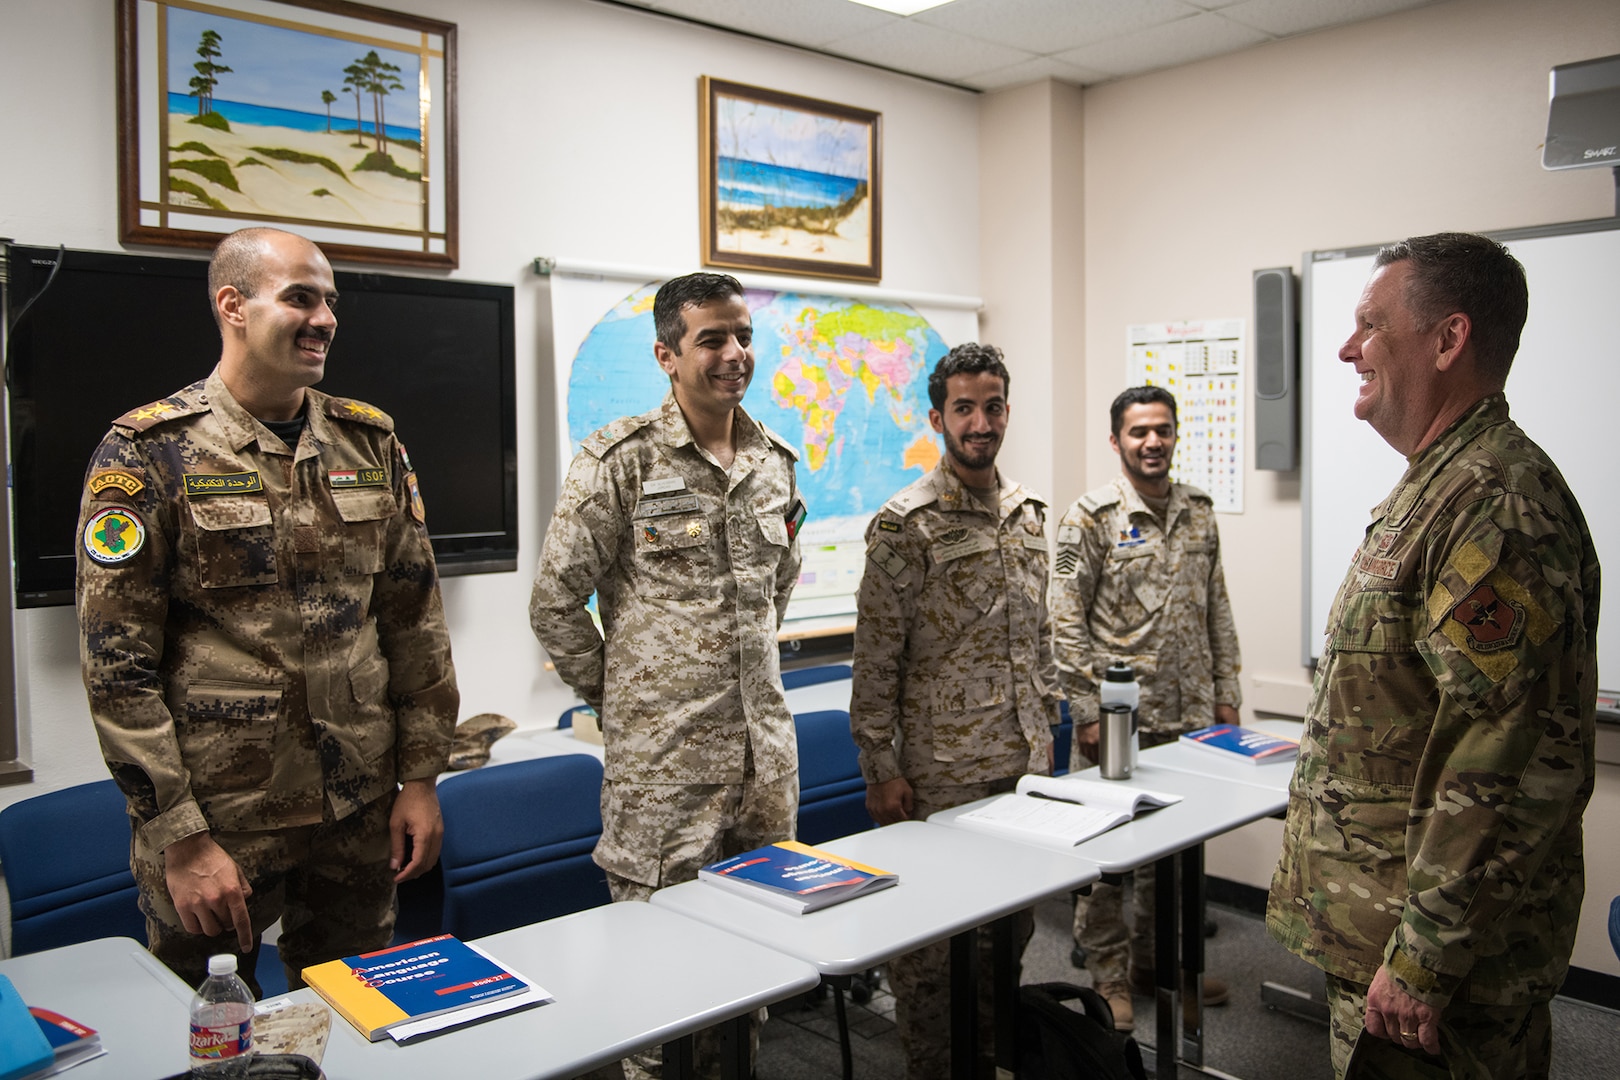 U.S. Air Force Lt. Gen. Brad Webb (right) meets with international students during his immersion tour at the 637th Training Group at Defense Language Institute English Language Center Aug.1, 2019, at Joint Base San Antonio-Lackland, Texas